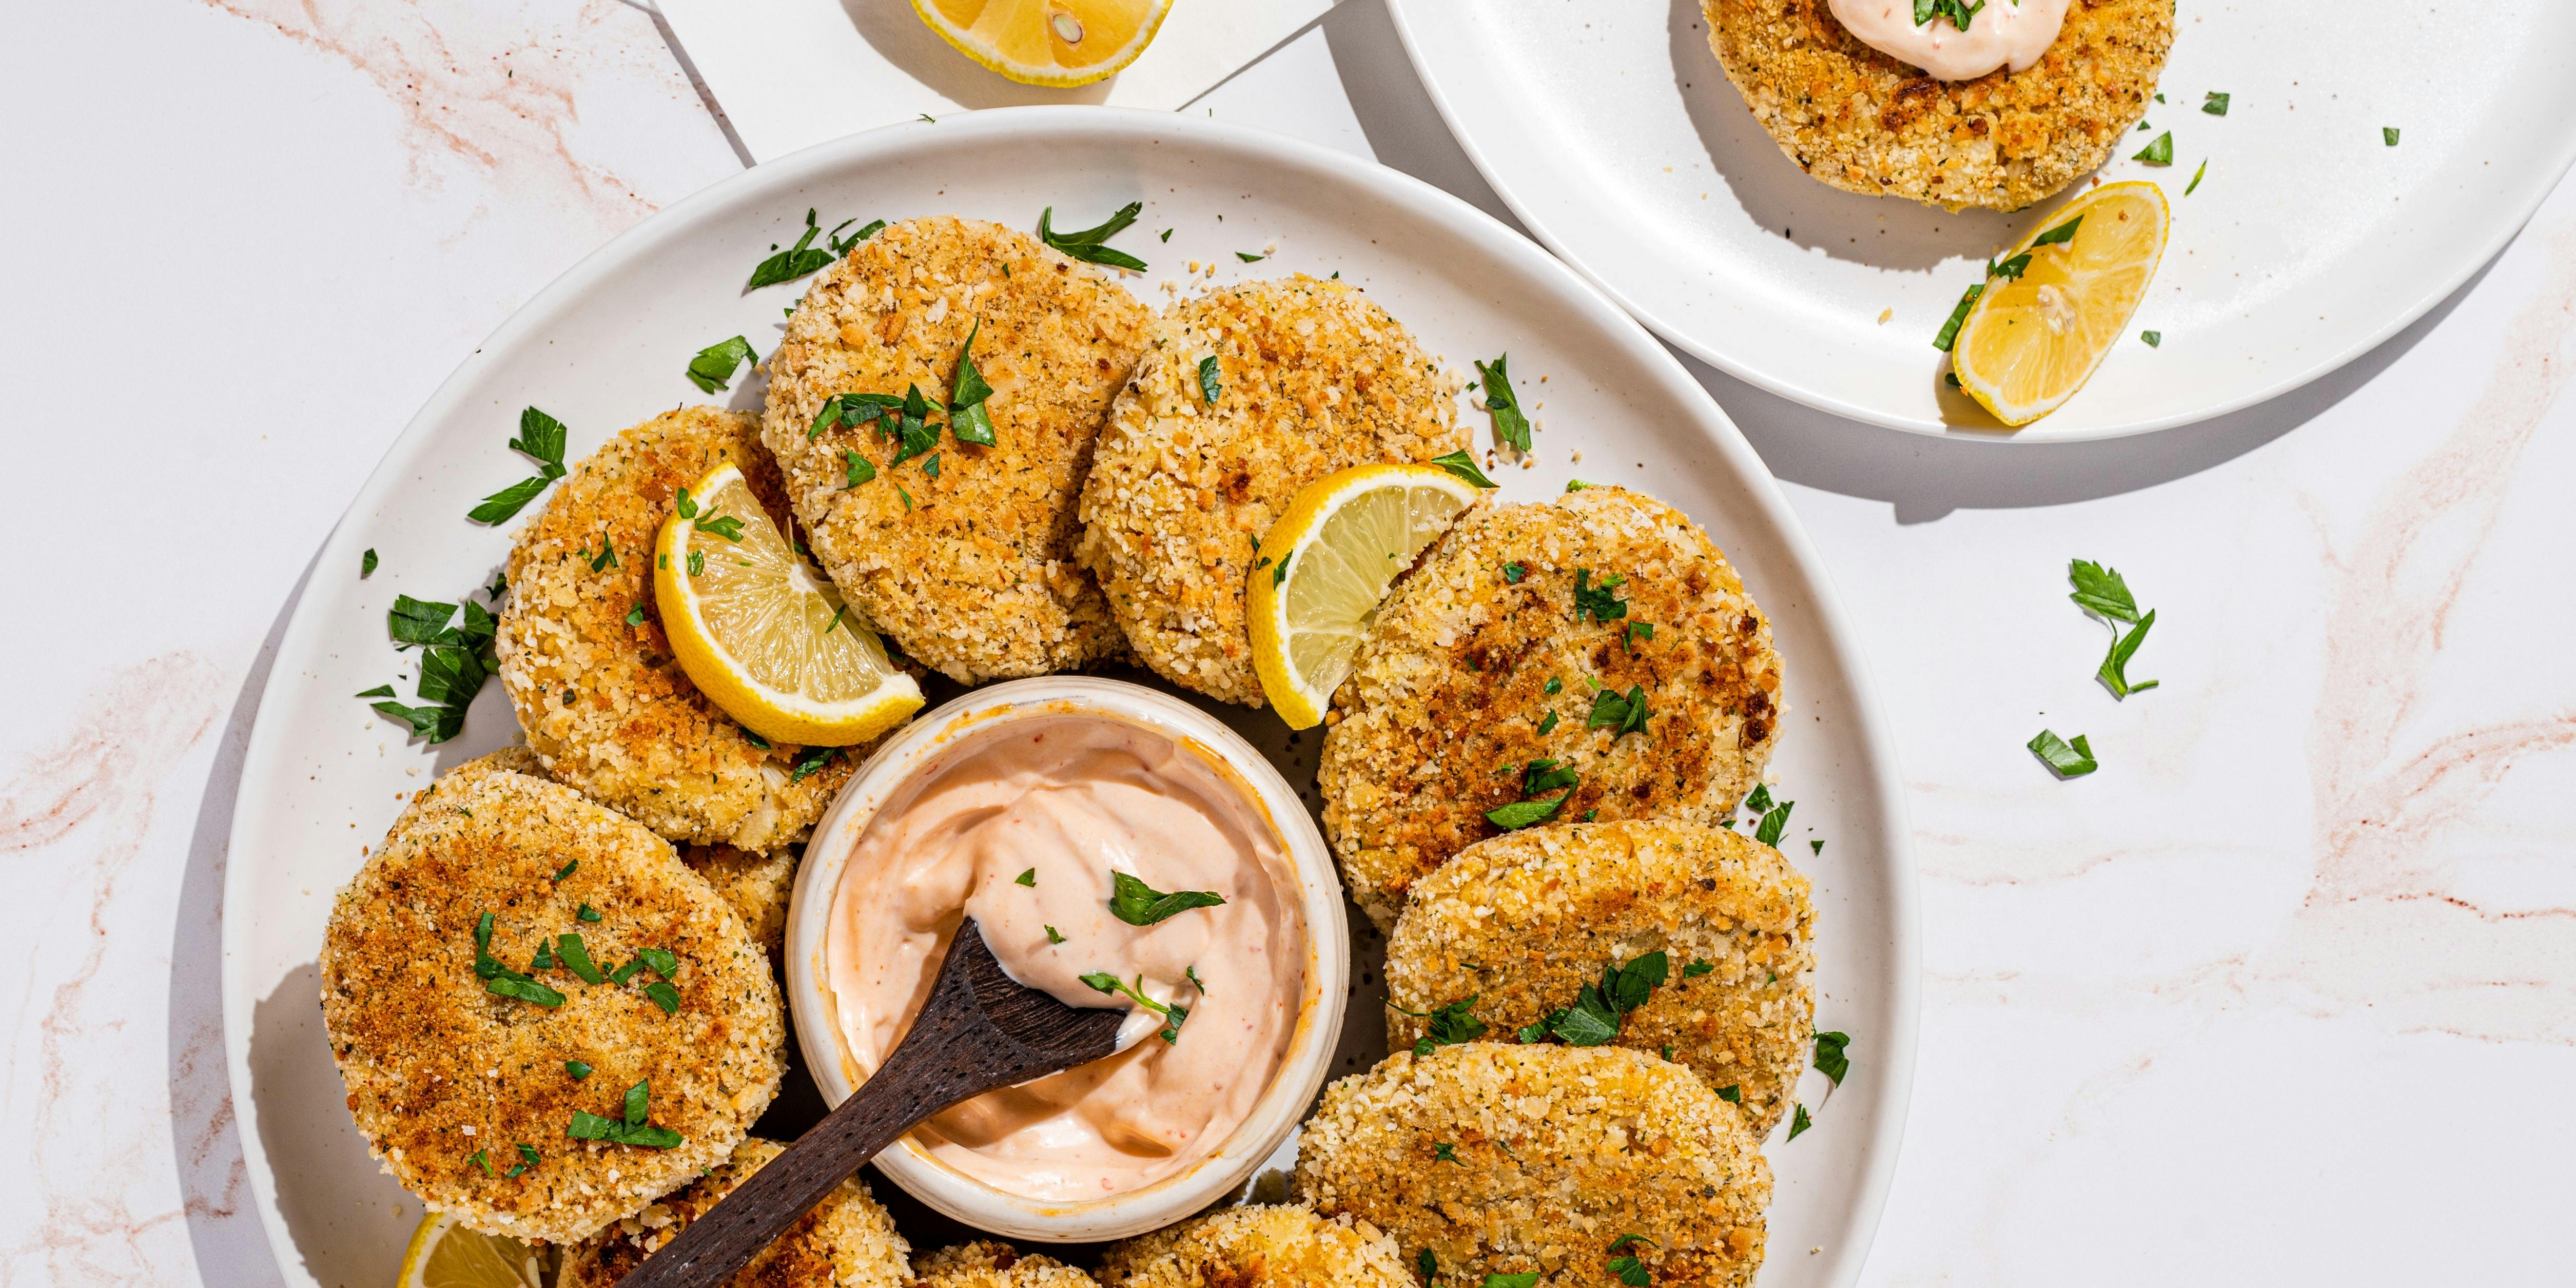 Hearts of palm crab cakes